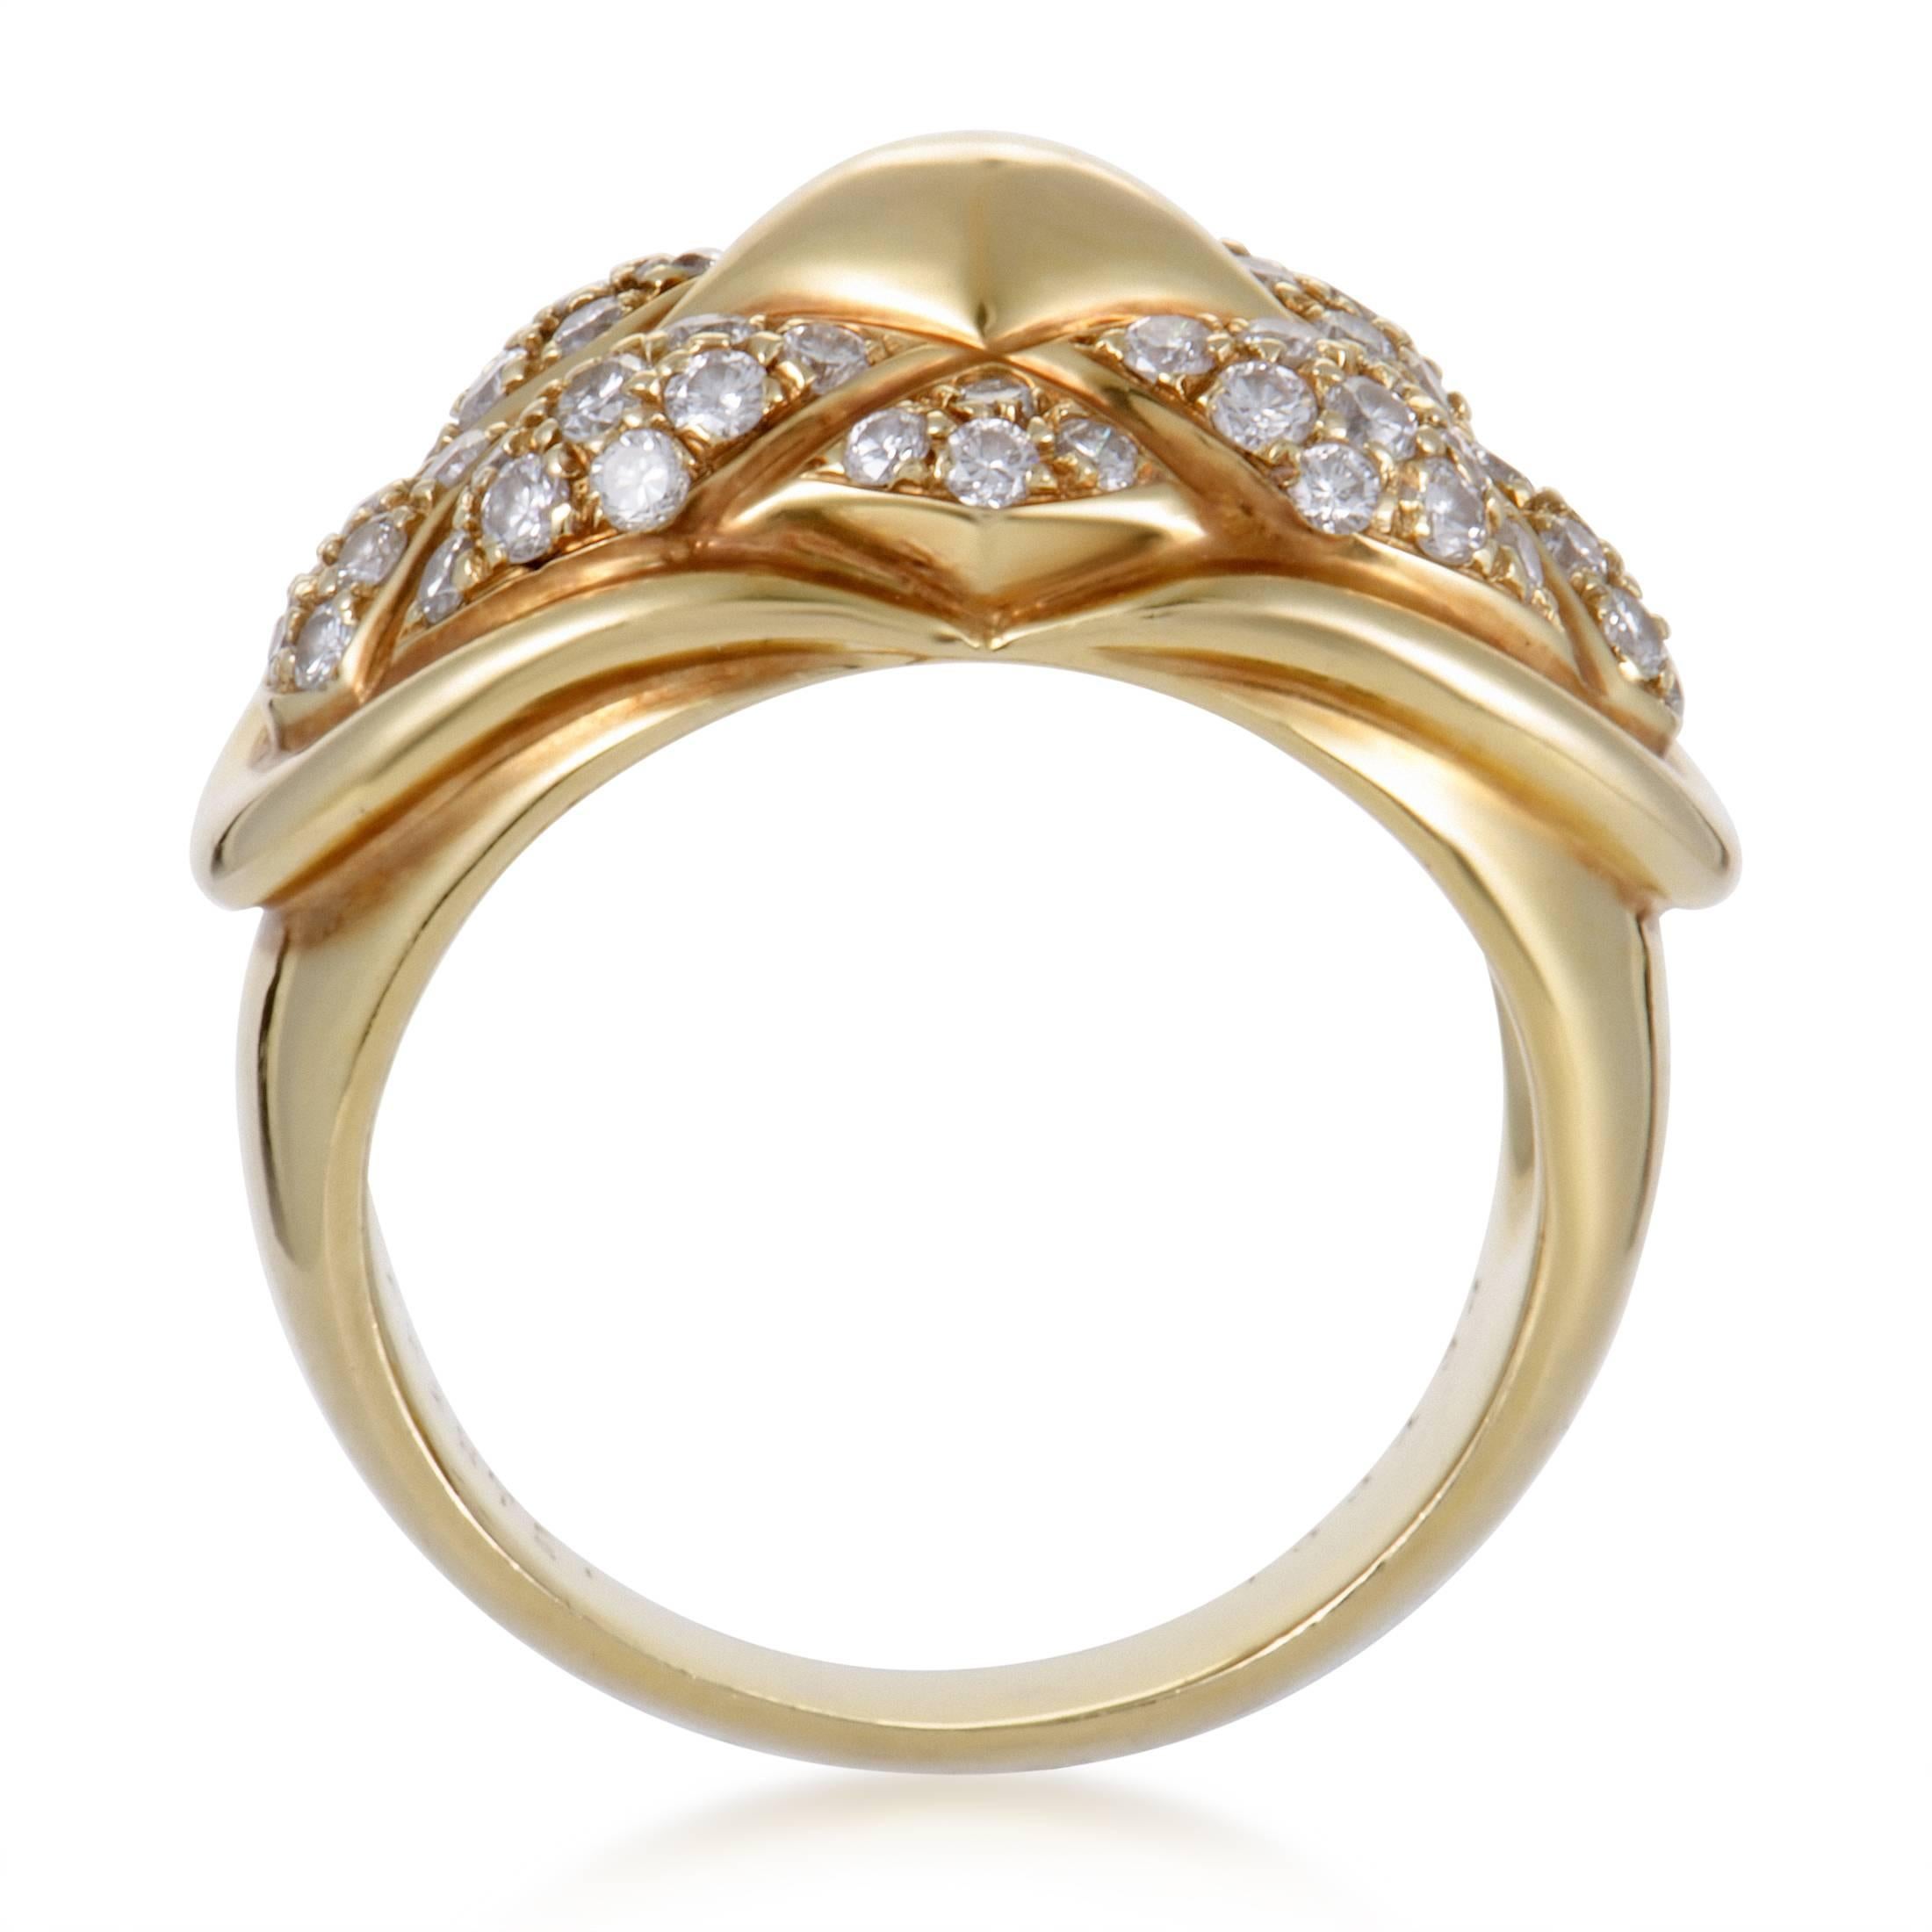 The allure of 18K yellow gold and diamonds is presented at its finest in this fabulous ring designed by Chaumet that boasts an incredibly glamorous appeal. The ring weighs 10.6 grams and the diamonds total 0.65 carats.
Ring Size: 6.75
Ring Top